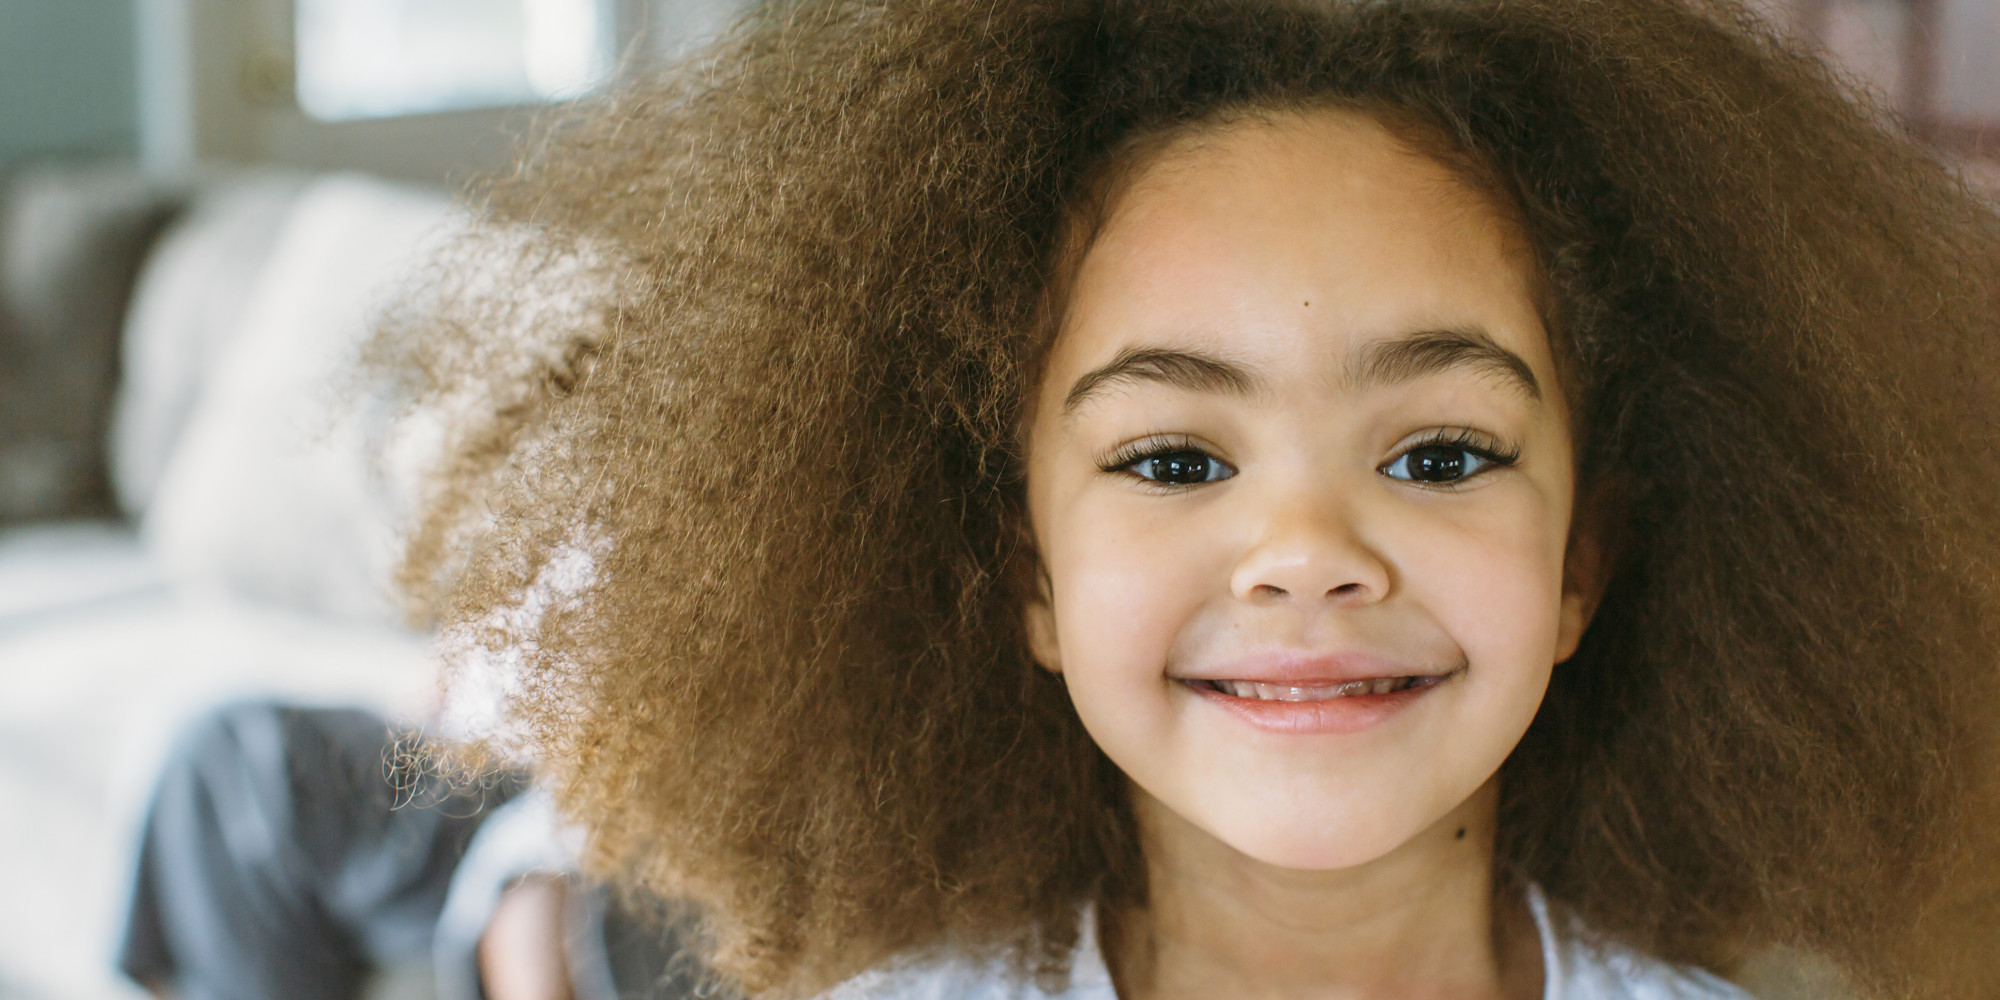 Little Black Girl Hairstyles 30 Stunning Kids Hairstyles For black girls, black shiny hair is the most befitting hair color option to choose as it goes really well with their skin tone and balances the overall look. little black girl hairstyles 30